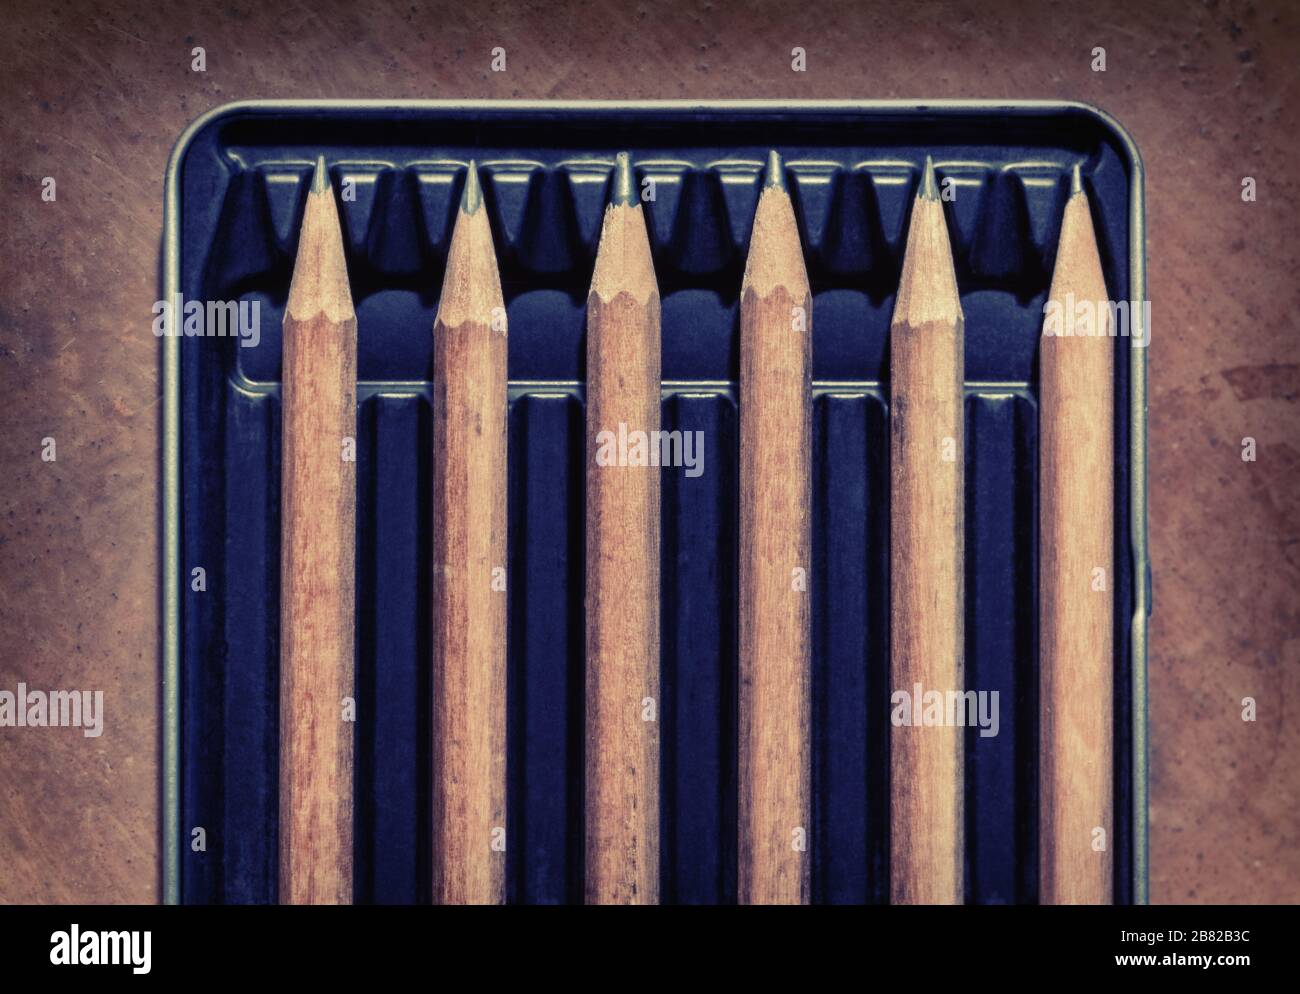 Wooden pencils in a box, separated by an empty space. Concept picture for social distancing. Stock Photo